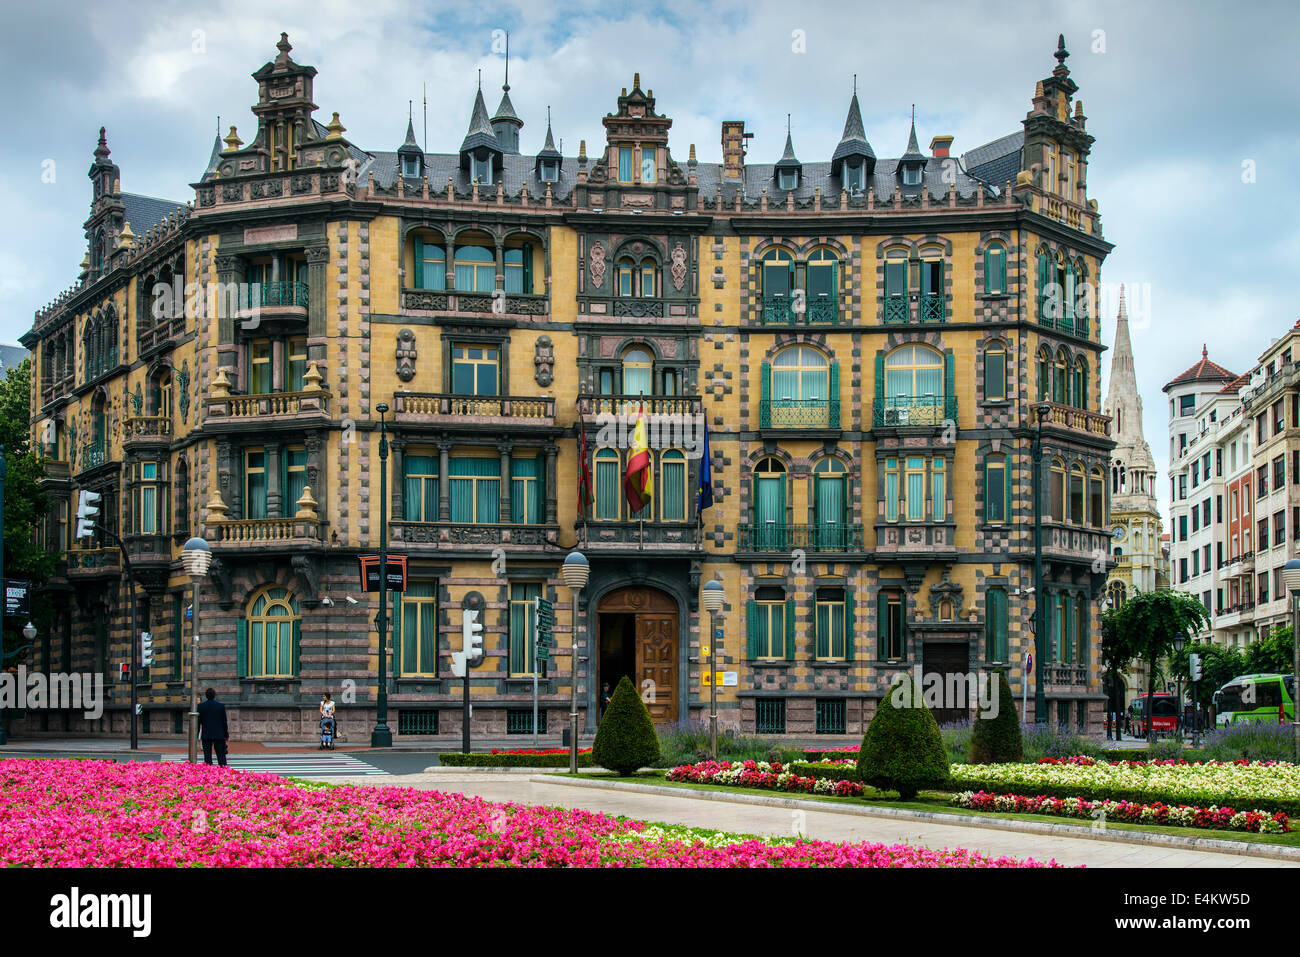 Chavarri Palace in Plaza Moyúa square, Bilbao, Biscay, Basque Country, Spain Stock Photo